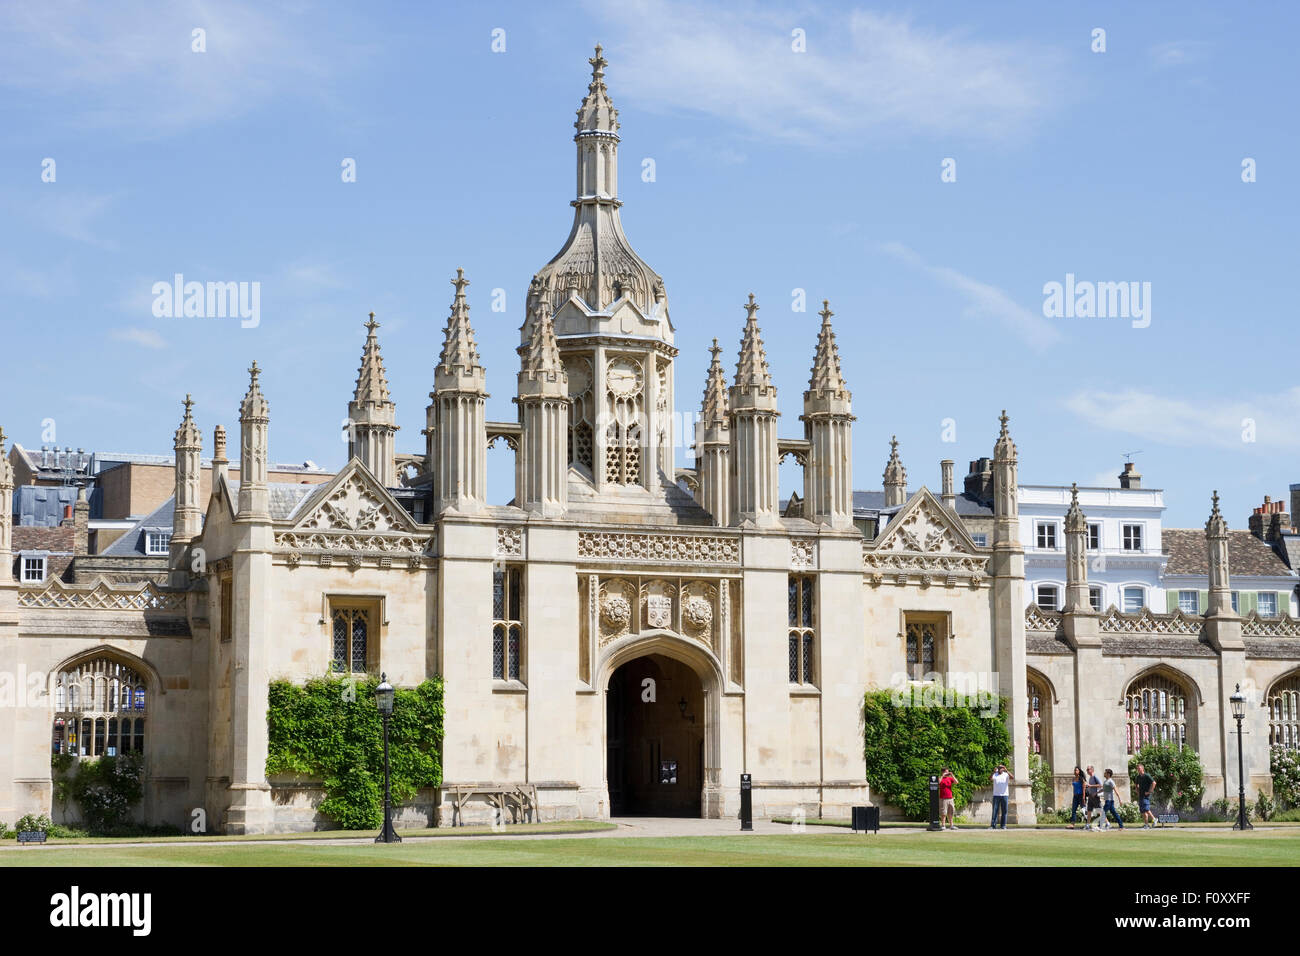 East side of Front Court, the entrance to King's College, Cambridge, England. Stock Photo